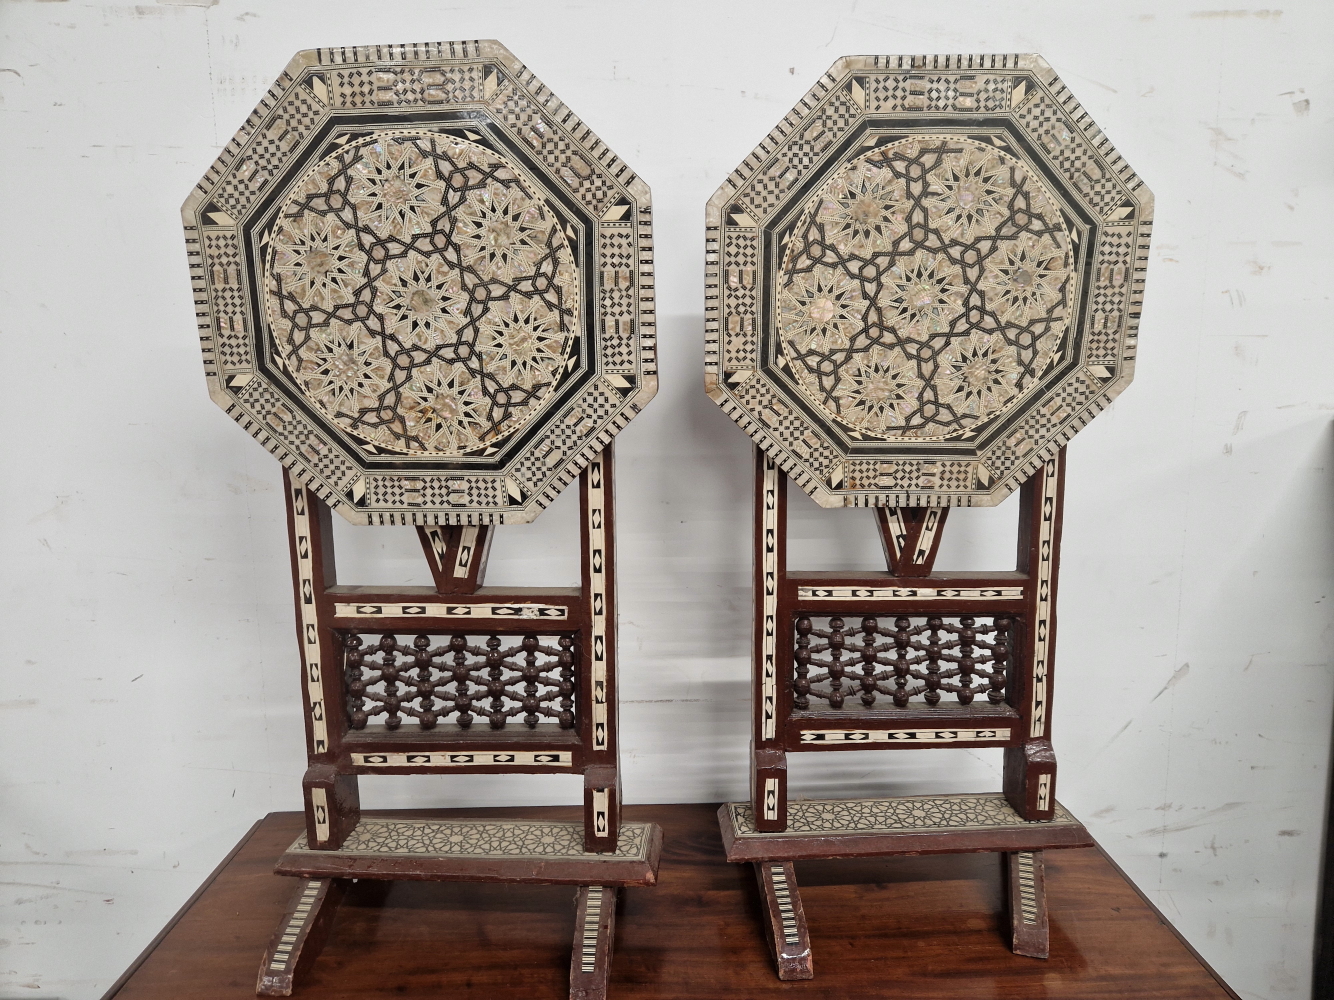 A PAIR OF ISLAMIC FOLDING OCTAGONAL TABLES GEOMETRICALLY INLAID IN MOTHER OF PEARL AND EBONY - Image 6 of 13